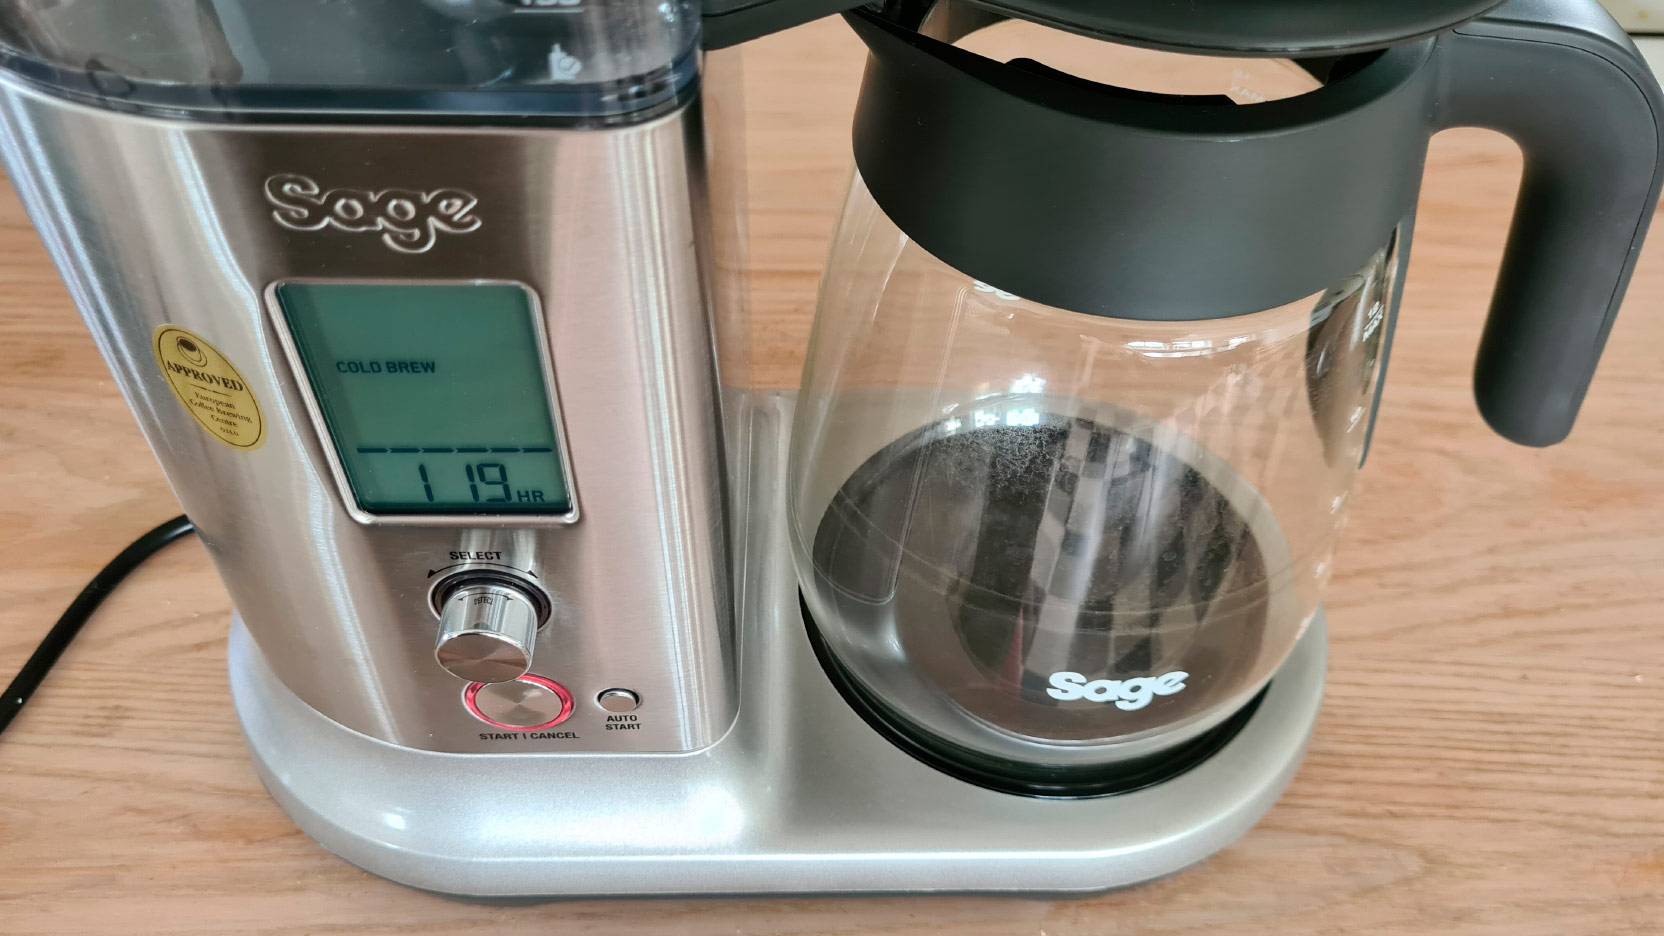 Image of countdown to Cold Brew on Sage the Precision Brewer while brewing